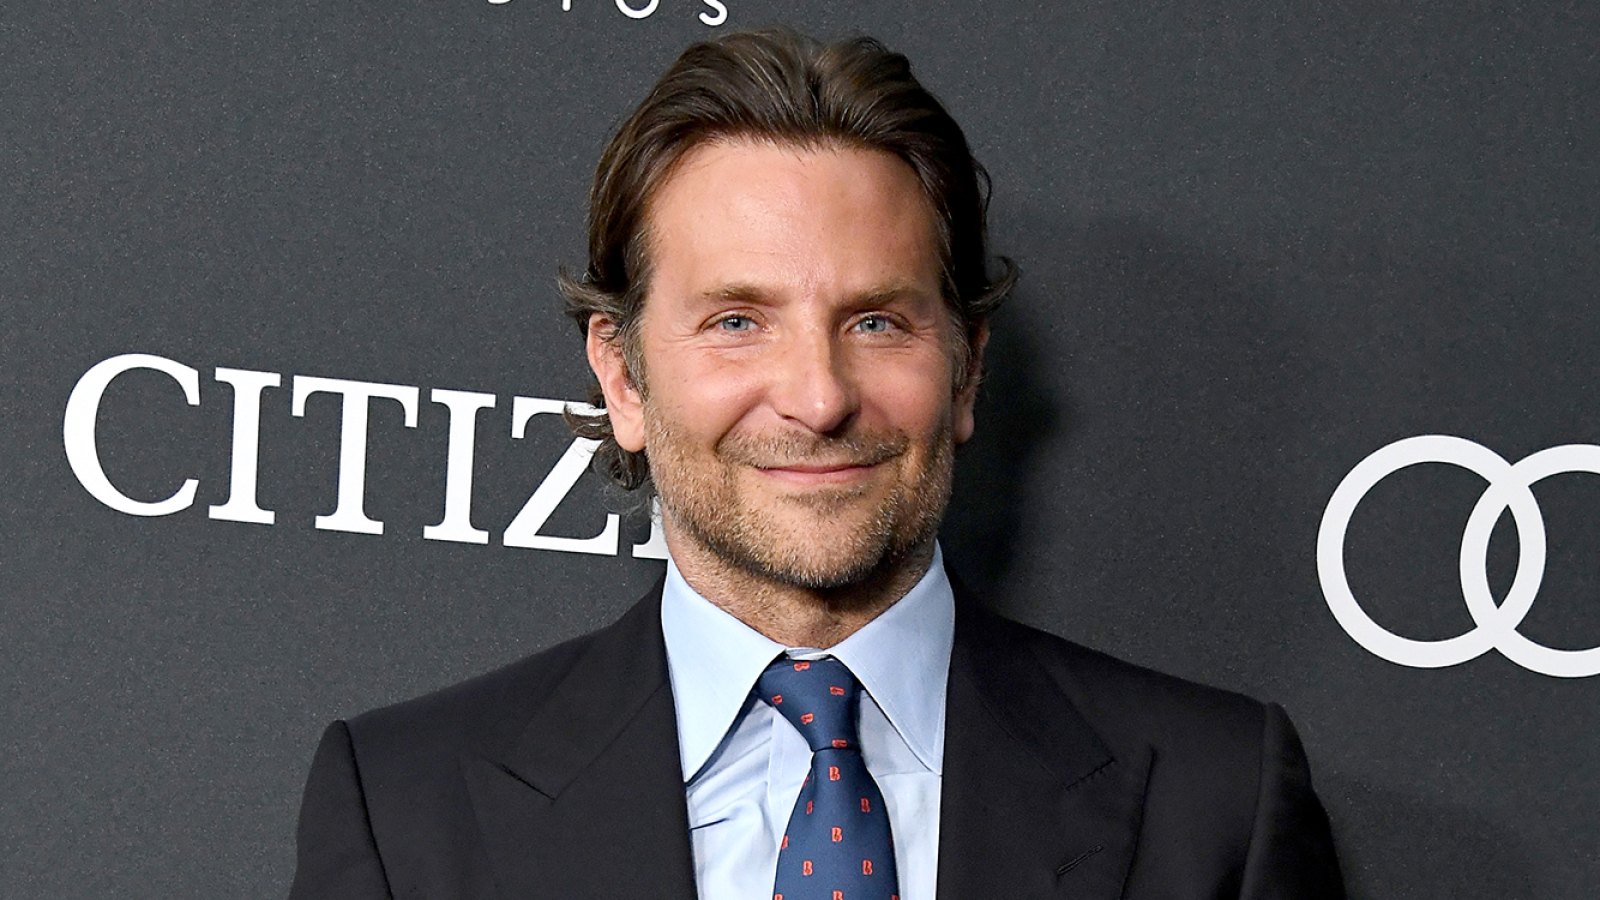 Bradley Cooper Says He Would Sign on for 'The Hangover 4' 'In an Instant' — But Doesn't Think It Will Ever Happen